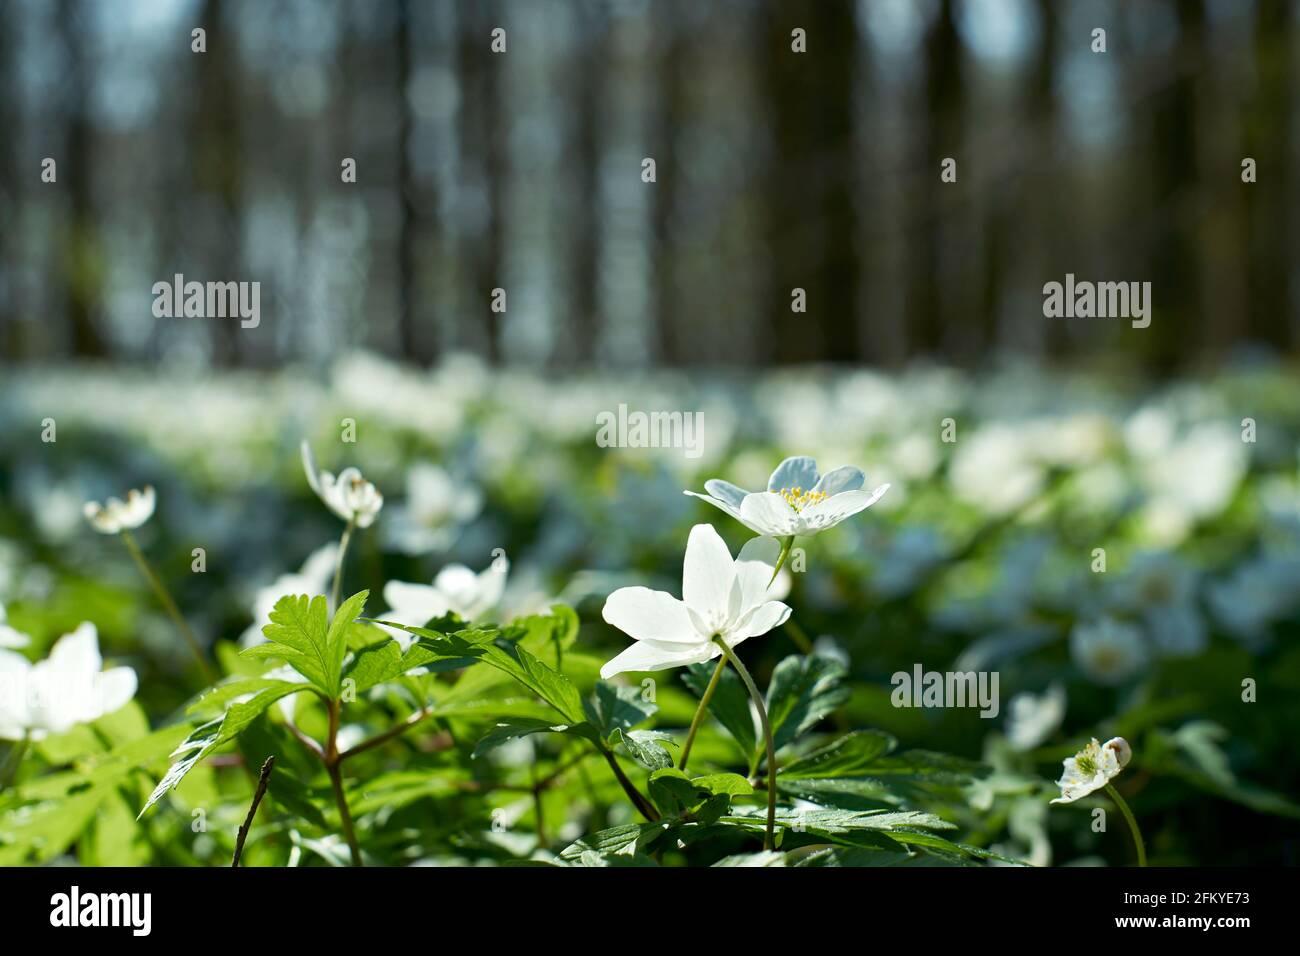 Wood anemones. Selective focus on flower head. Blurred background. Stock Photo